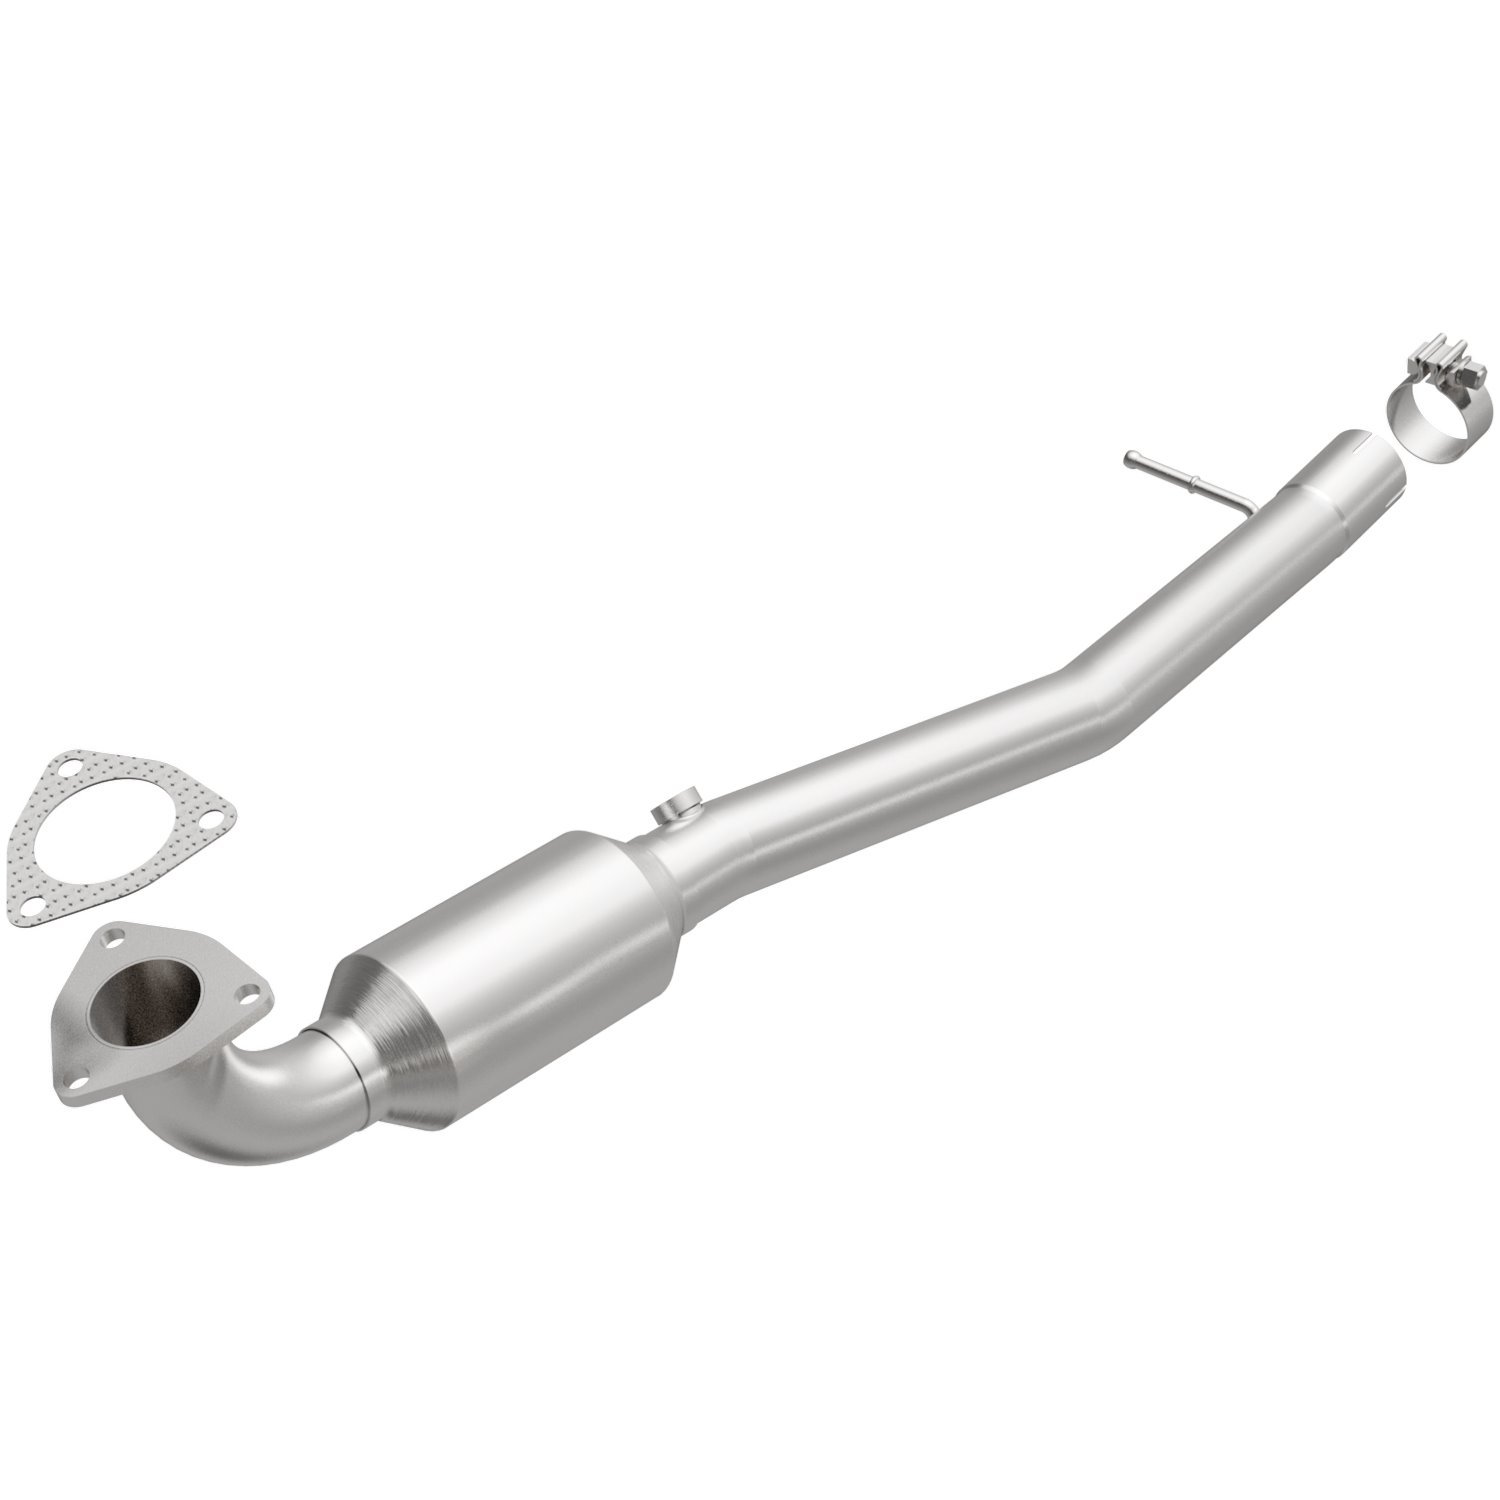 2010-2012 Land Rover Range Rover OEM Grade Federal / EPA Compliant Direct-Fit Catalytic Converter